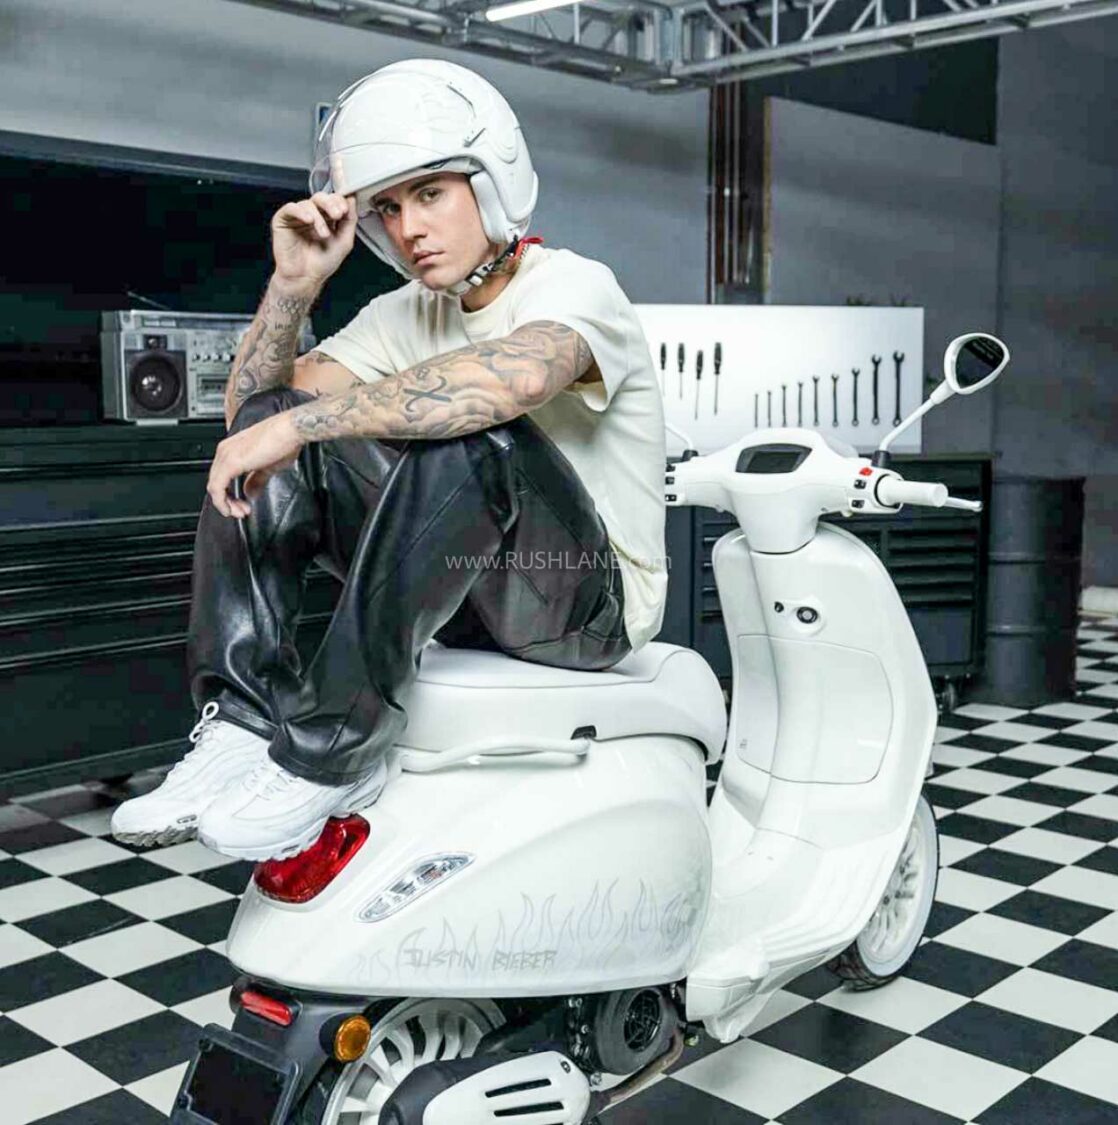 Vespa Justin Bieber Edition 150cc Scooter Launch Price Rs 6.46 Lakh